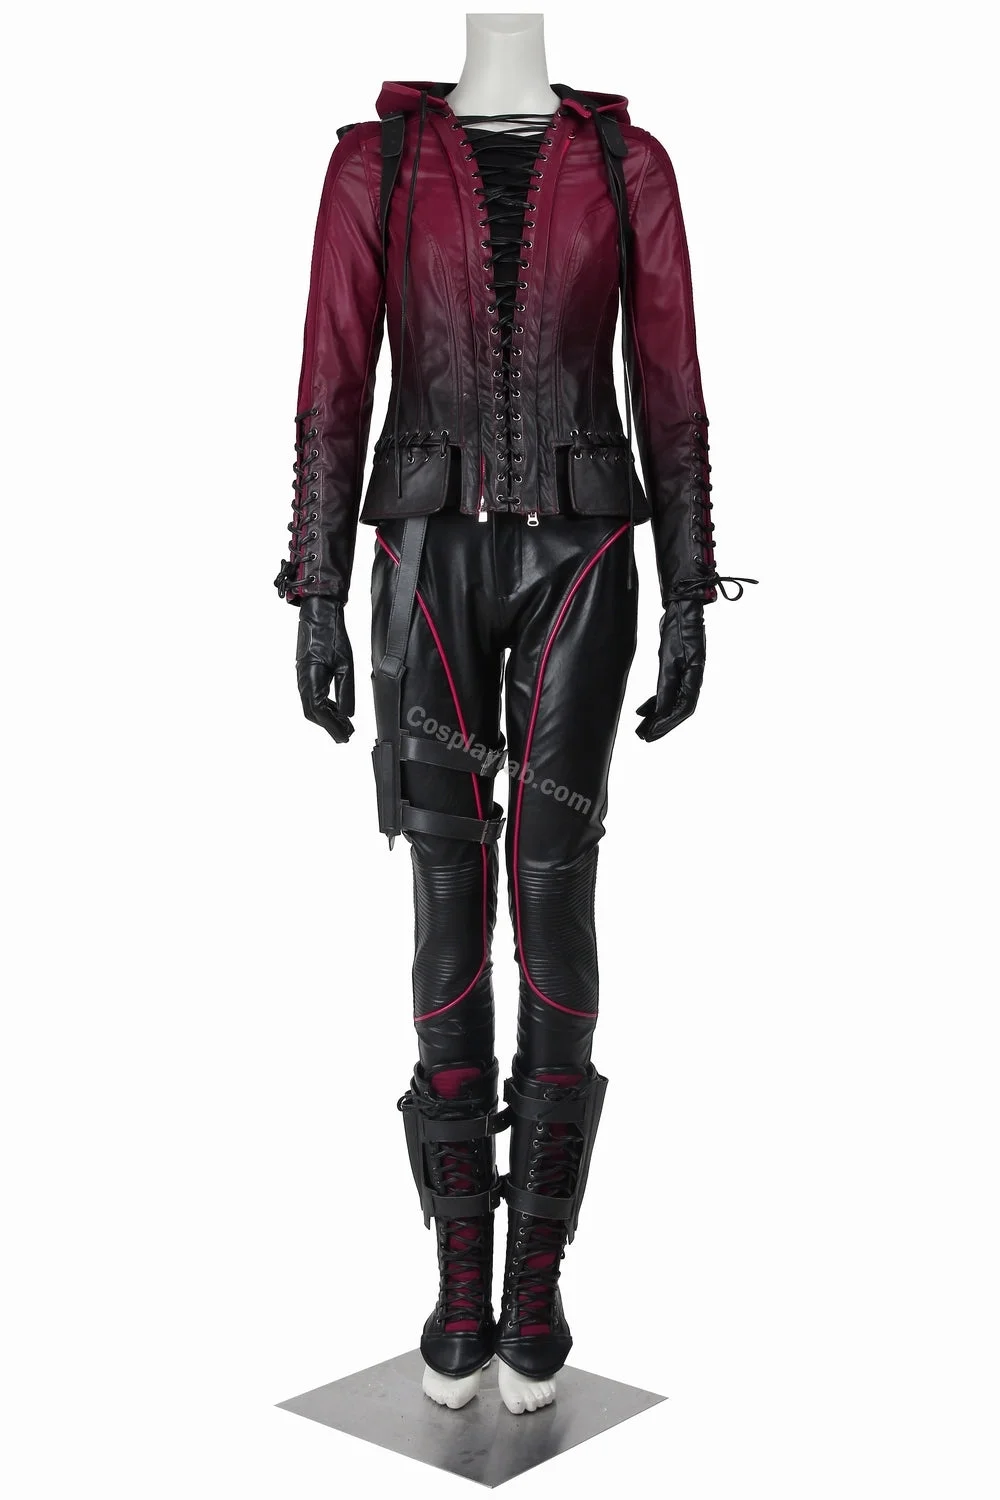 Red Arrow Thea Queen Cosplay Costumes outfits suit By CosplayLab